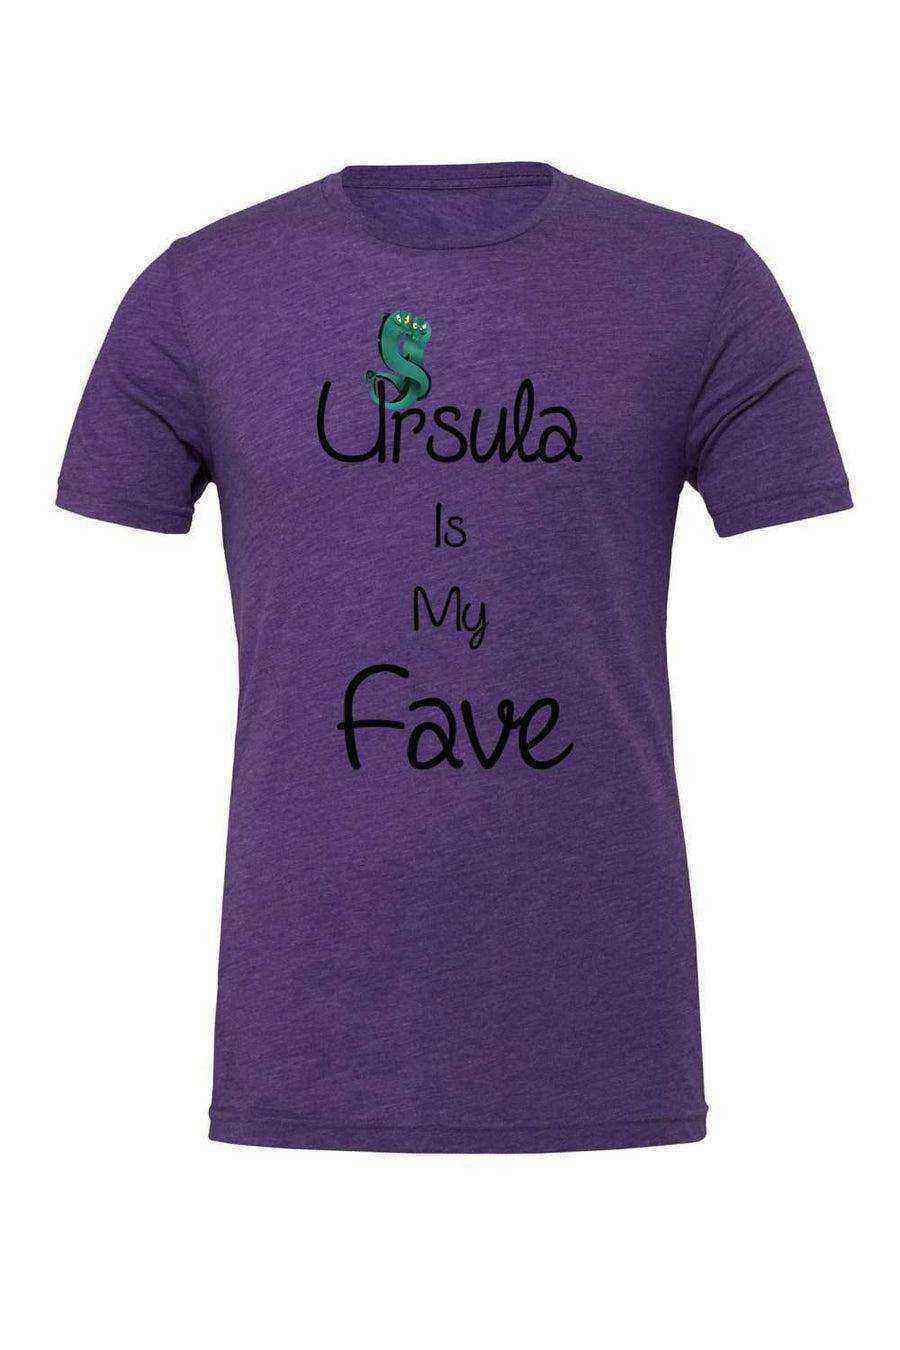 Womens | Ursula is my Fave Shirt - Dylan's Tees